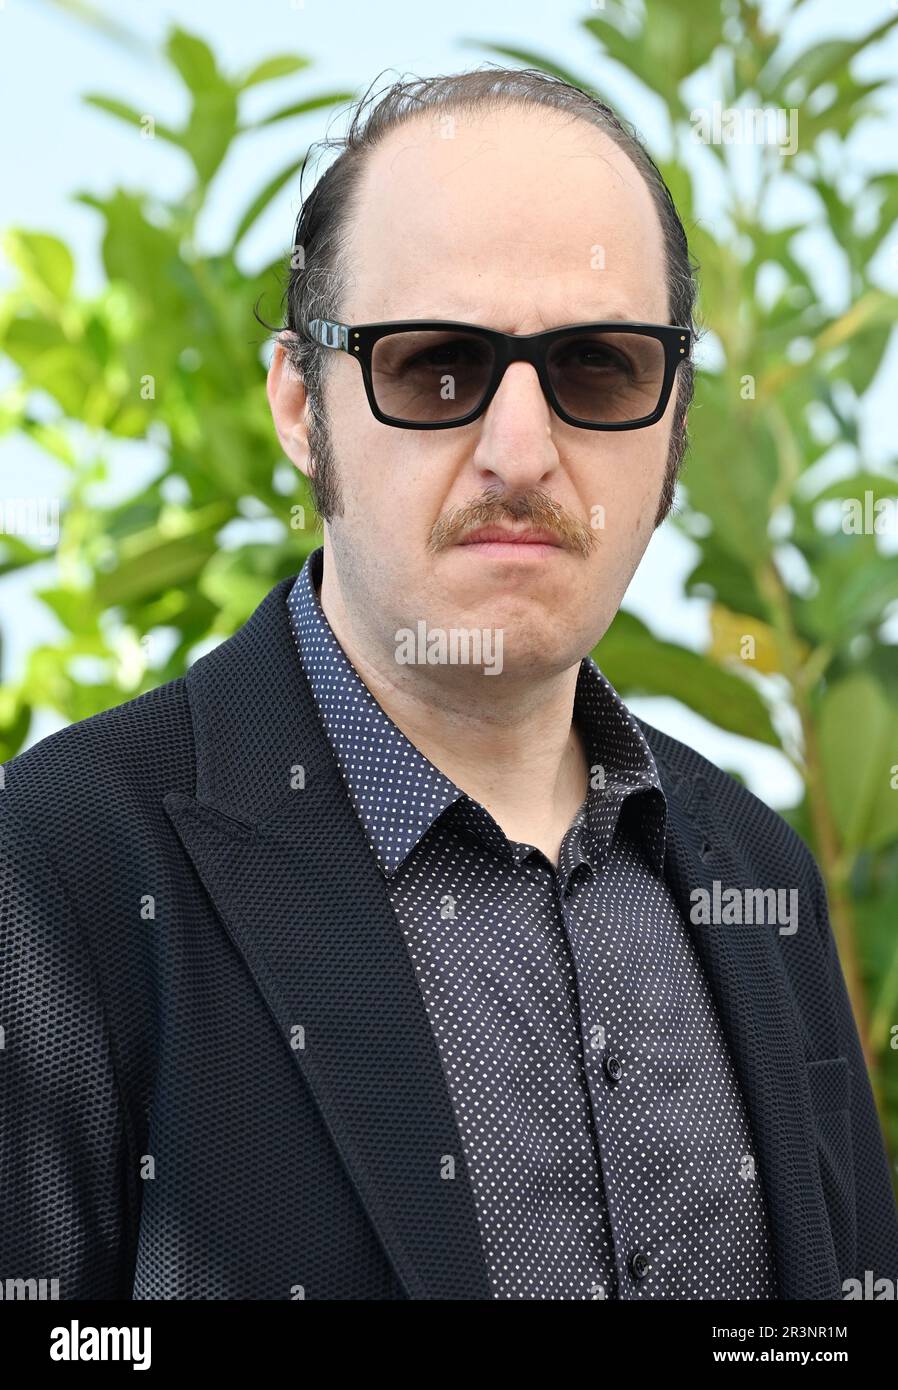 Cannes, France. 24th May, 2023. Italian actor Fausto Russo Alesi attends a photo call for Kidnapped at the 76th Cannes Film Festival at Palais des Festivals in Cannes, France on Wednesday, May 24, 2023. Photo by Rune Hellestad/ Credit: UPI/Alamy Live News Stock Photo